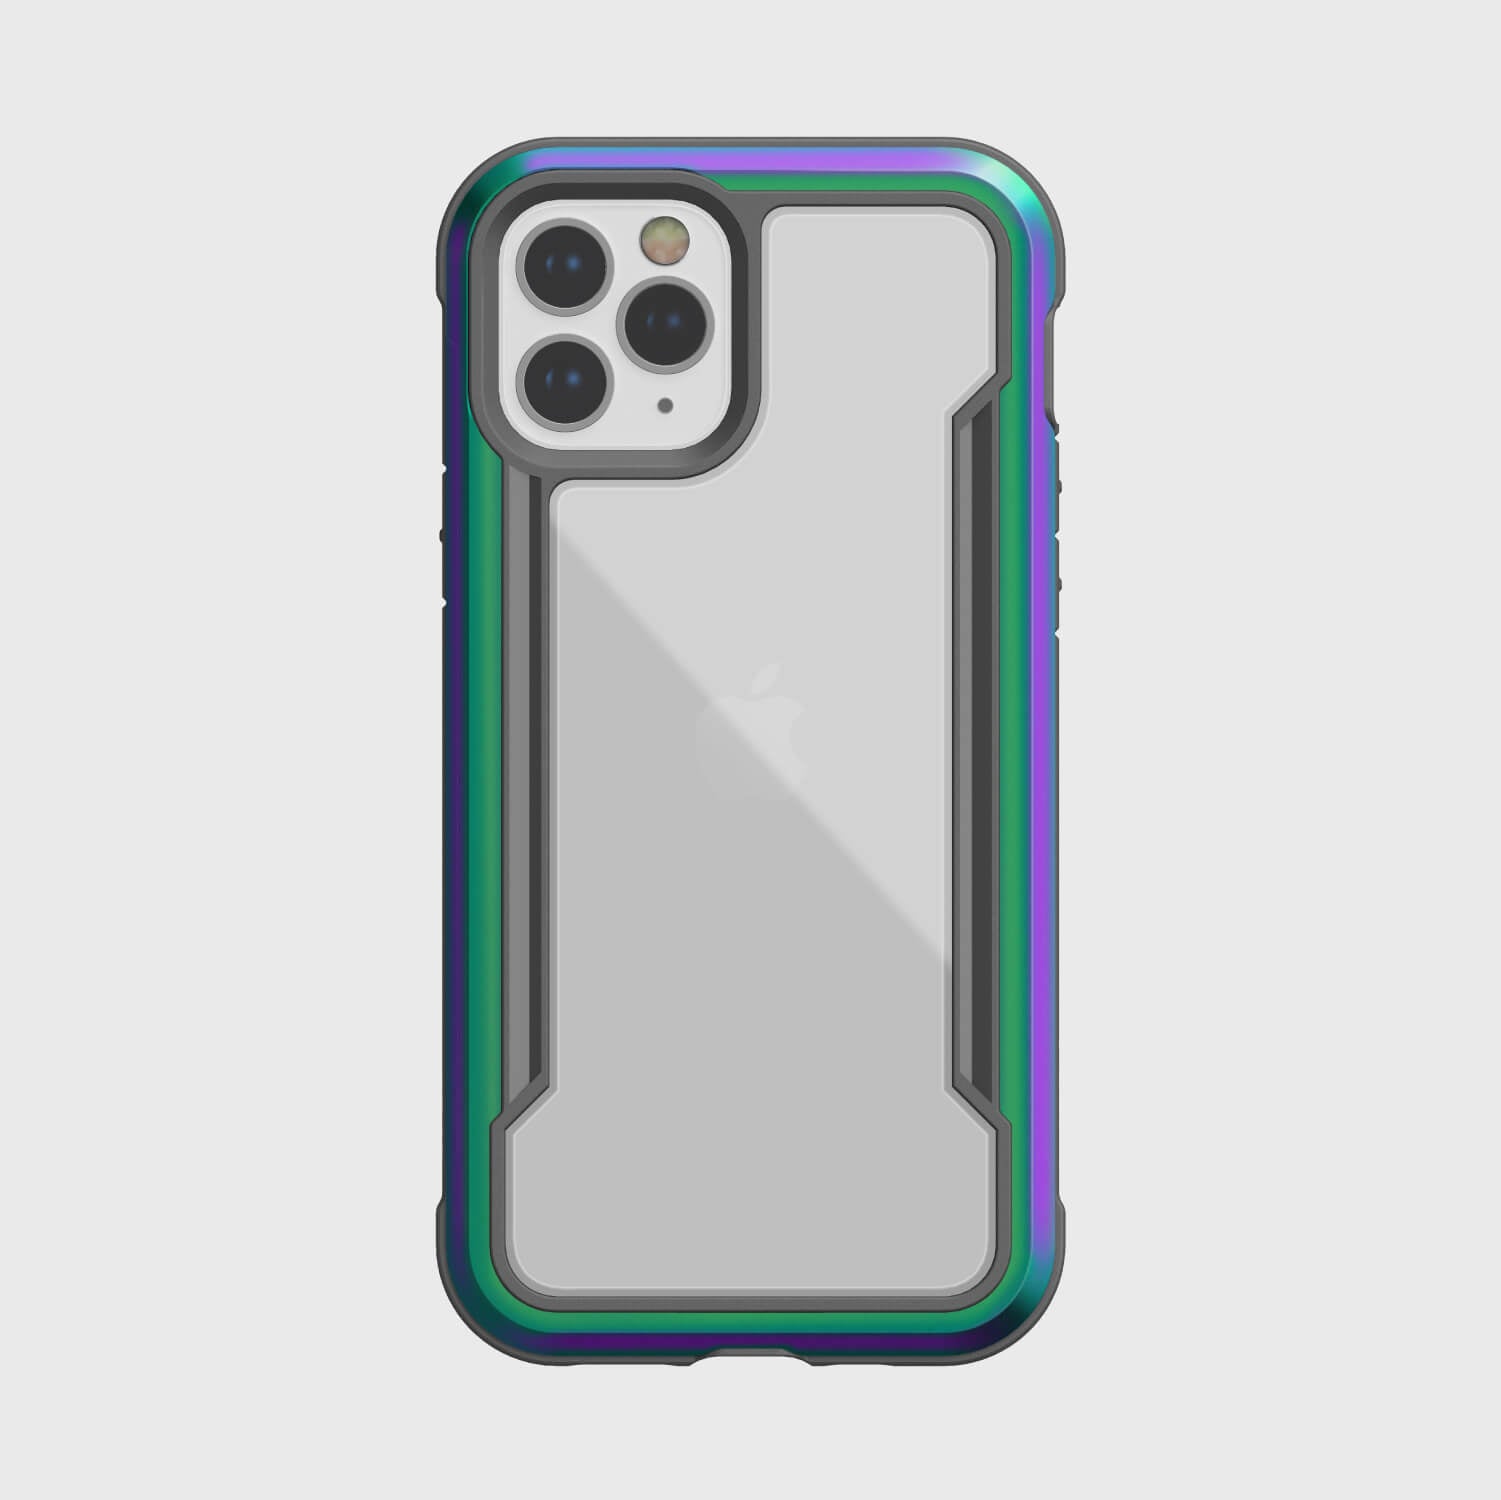 The Raptic Shield case offers 13' foot drop protection for the back view of an iPhone 12 Pro Max Case - SHIELD in purple, green, and blue.